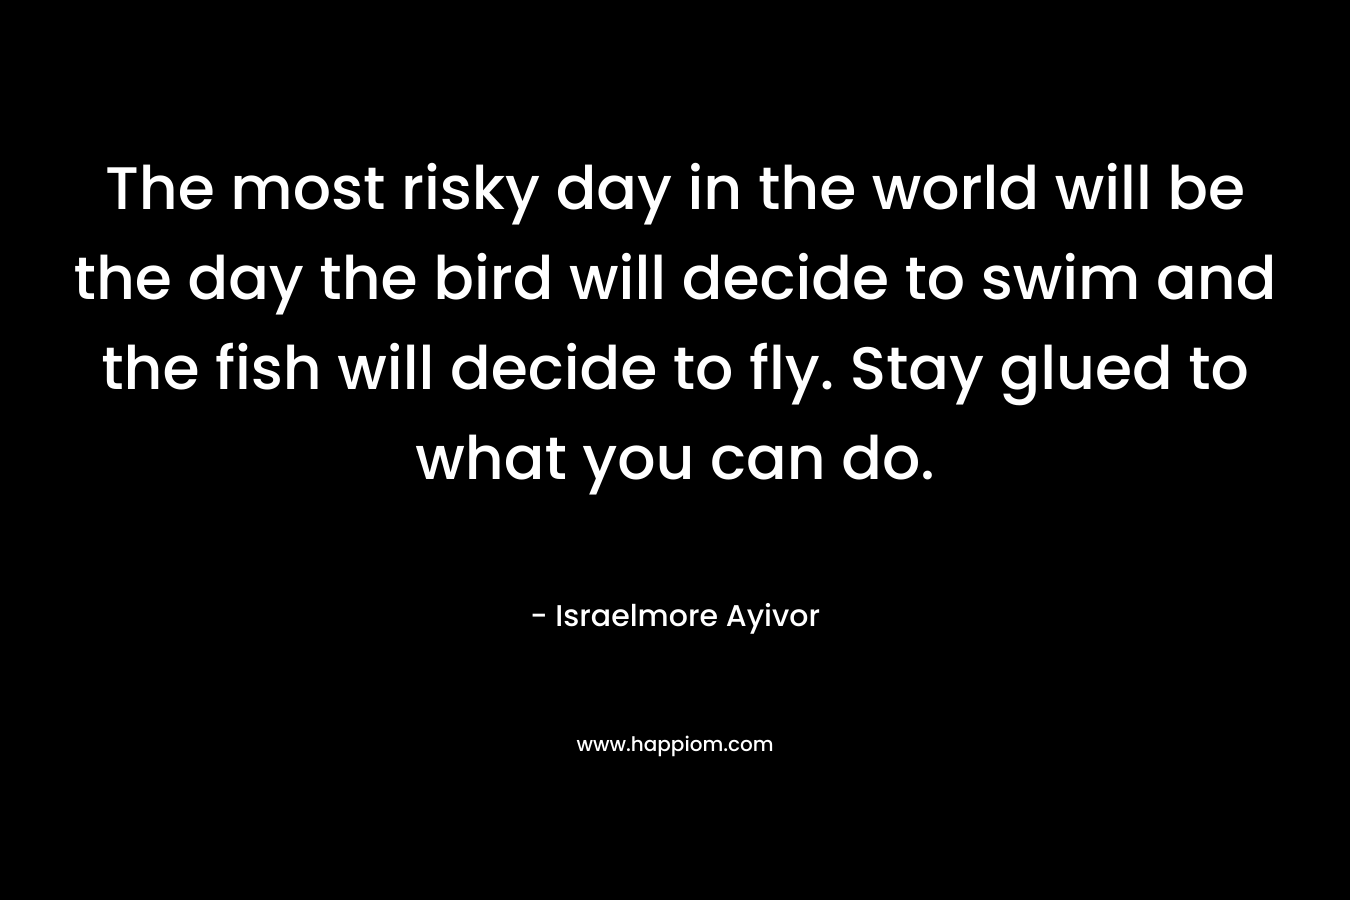 The most risky day in the world will be the day the bird will decide to swim and the fish will decide to fly. Stay glued to what you can do.